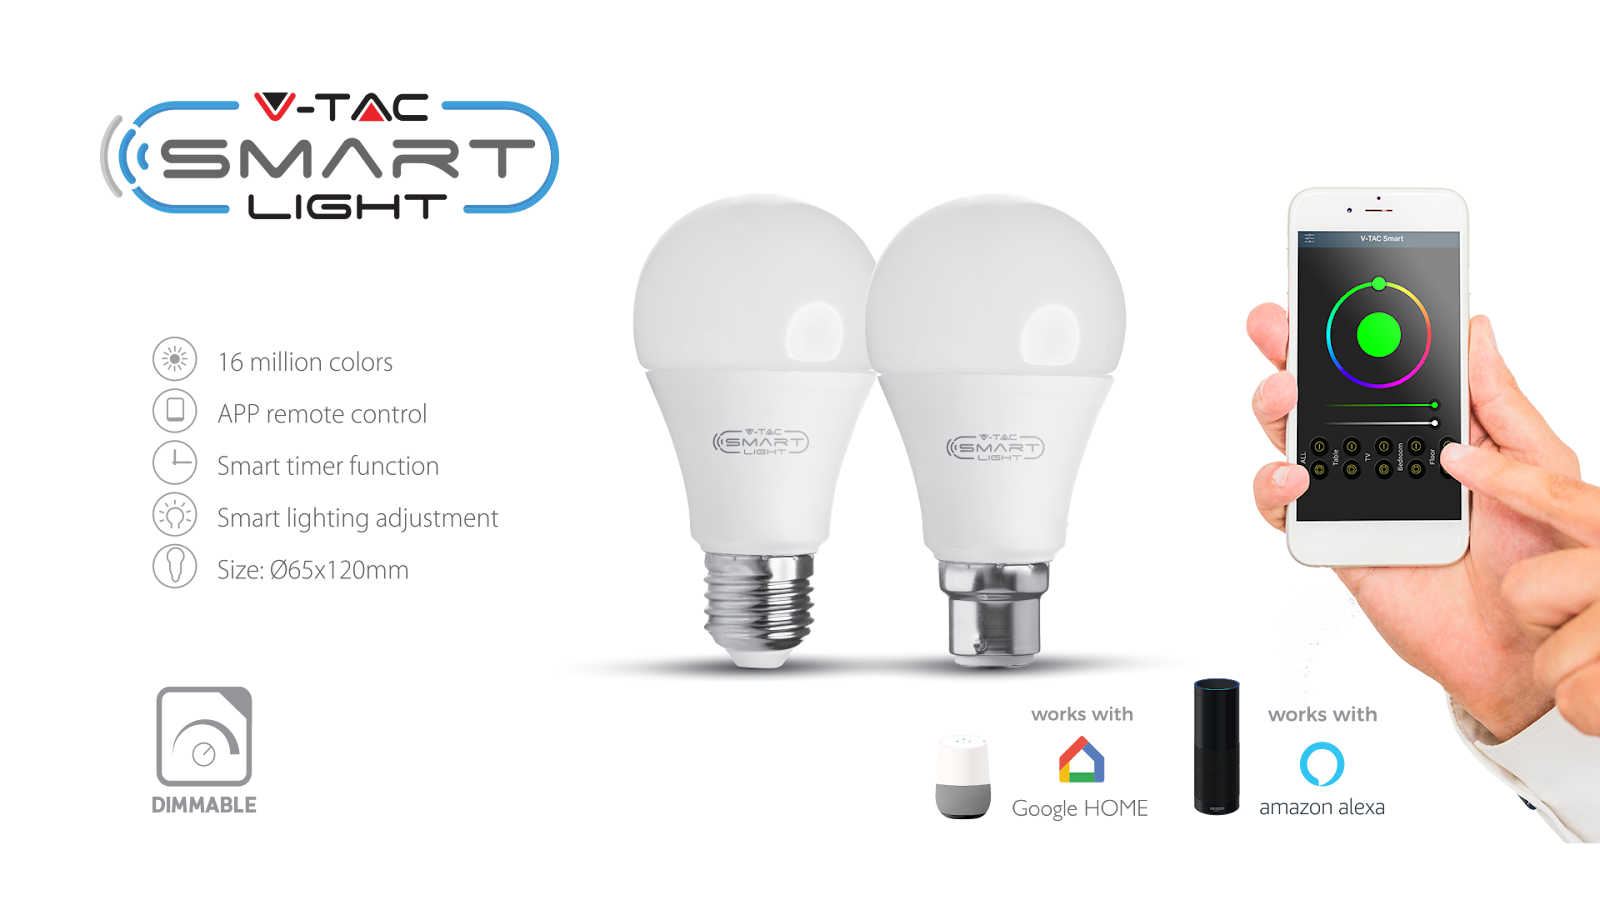 V-TAC Smart: Using App & Voice Controls As A Safety Measure In The Time of  COVID-19 – V-TAC Innovative LED Lighting